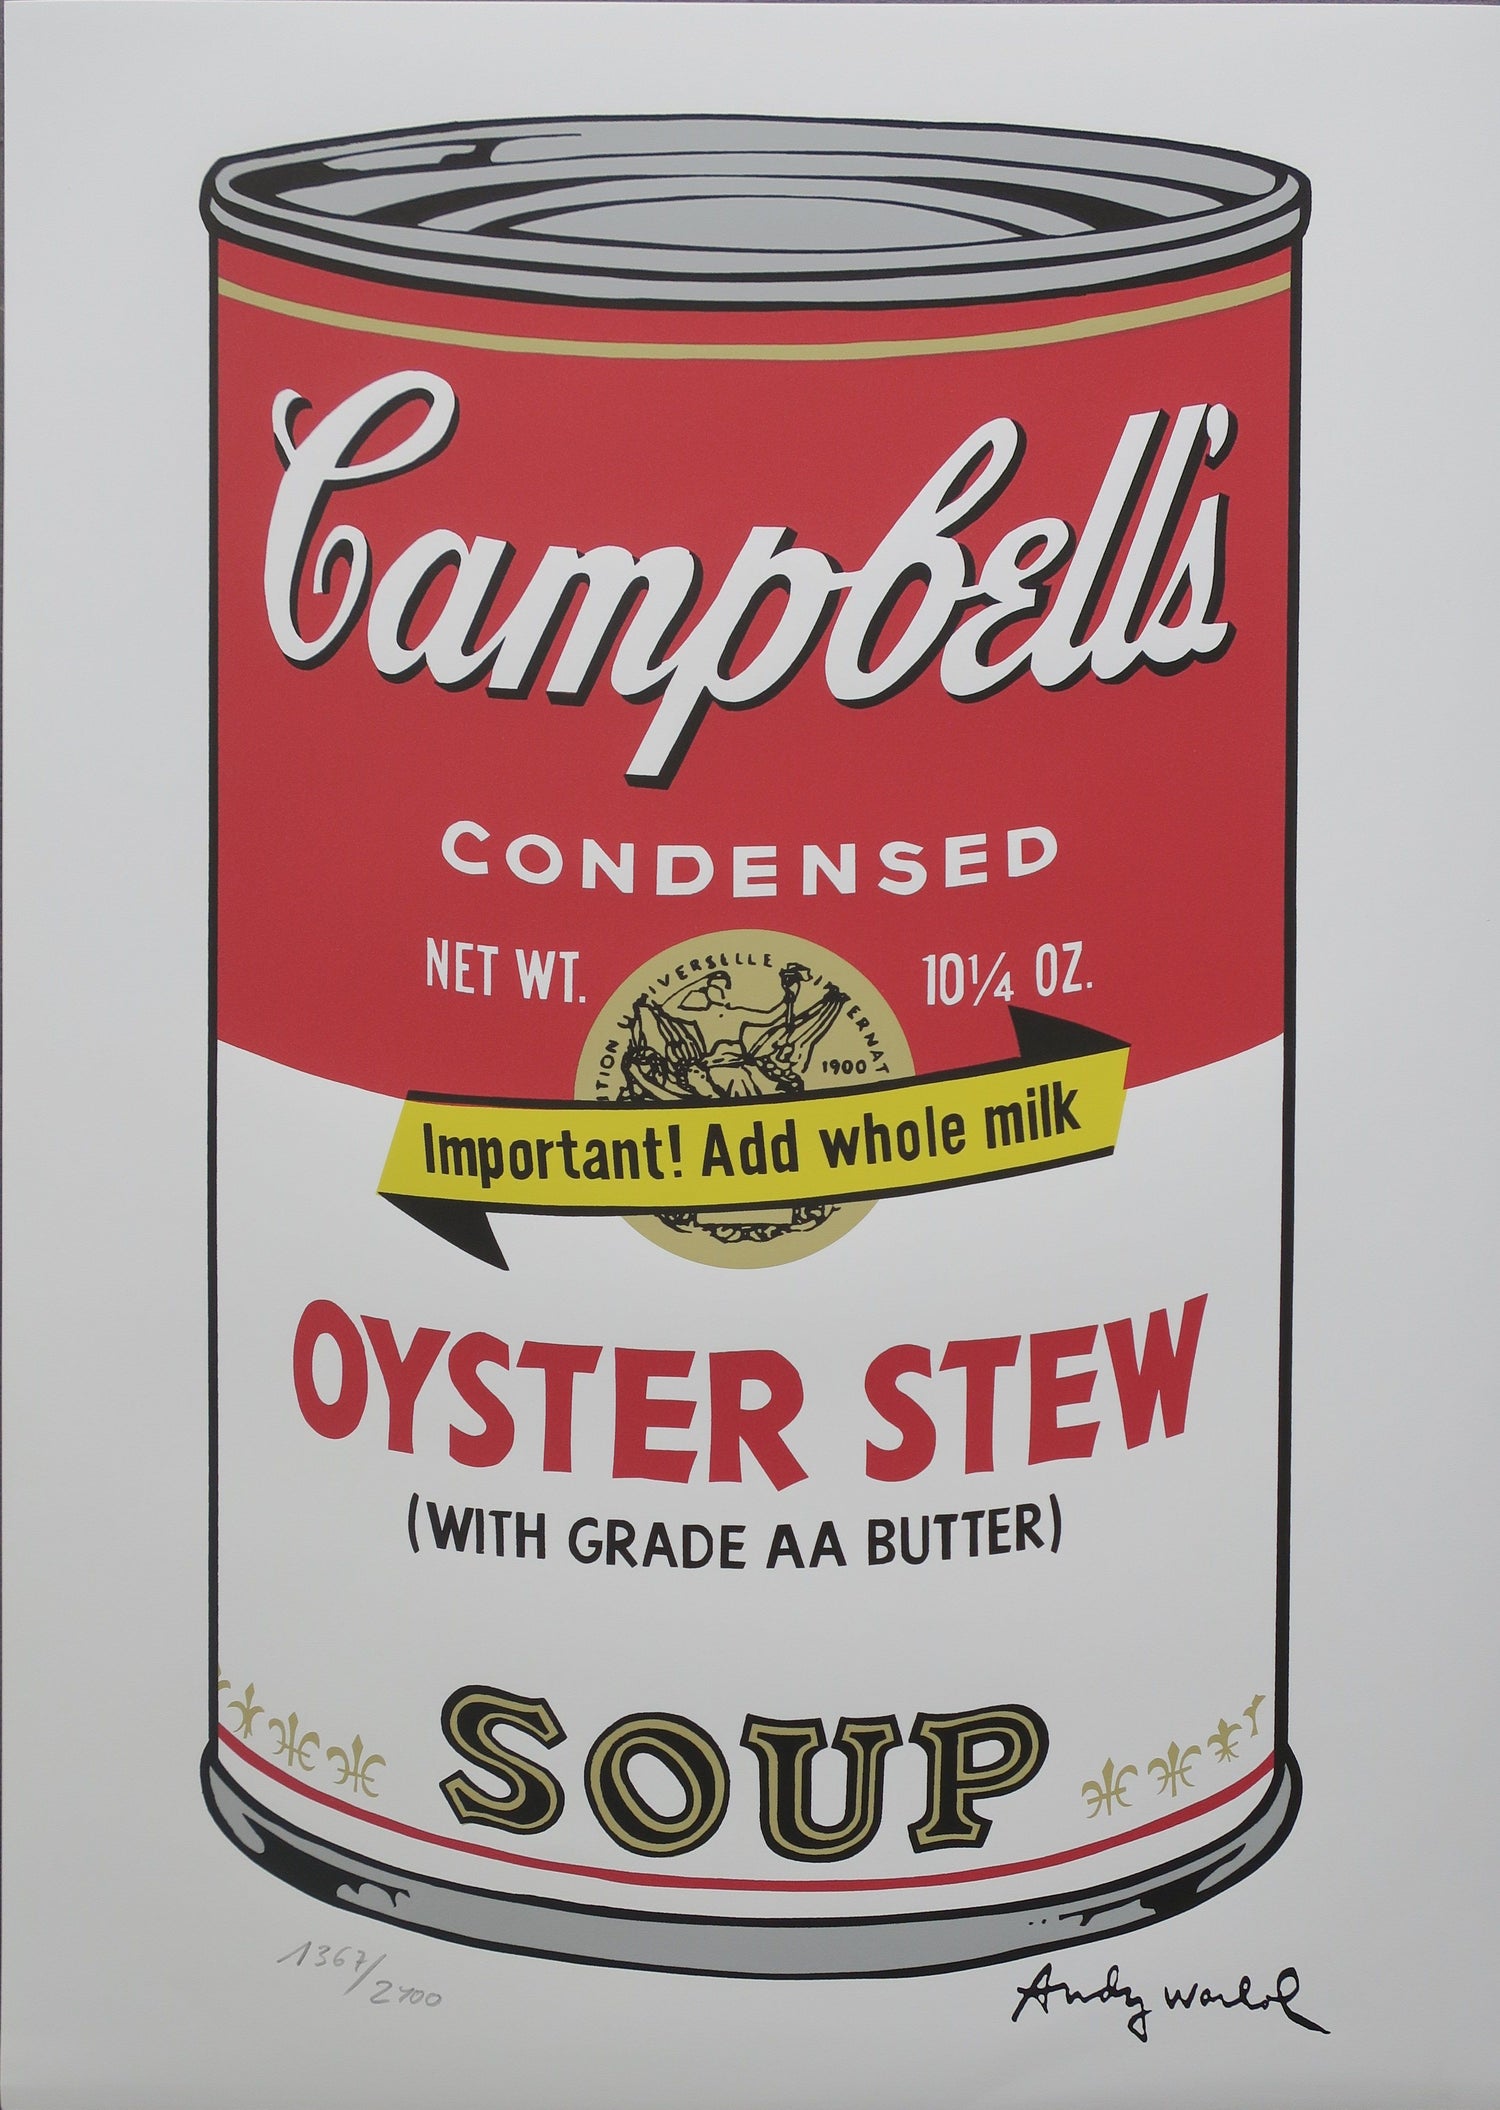 Andy Warhol Campbell's Soup Oyster Stew print